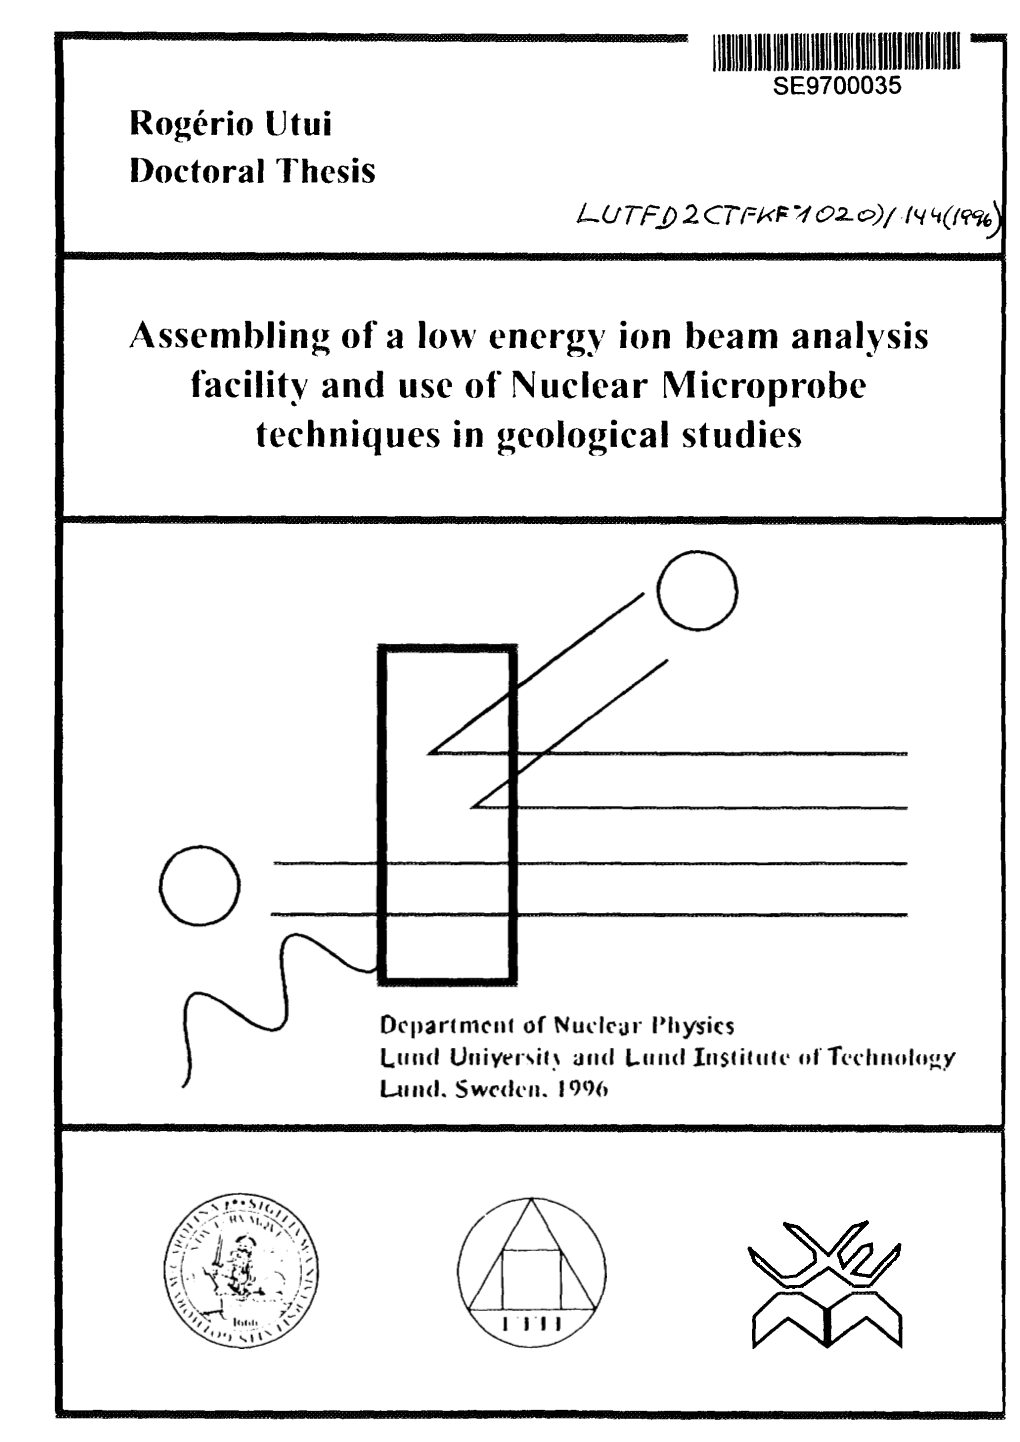 Assembling of a Low Energy Ion Beam Analysis Facility and Use of Nuclear Microprobe Techniques in Geological Studies